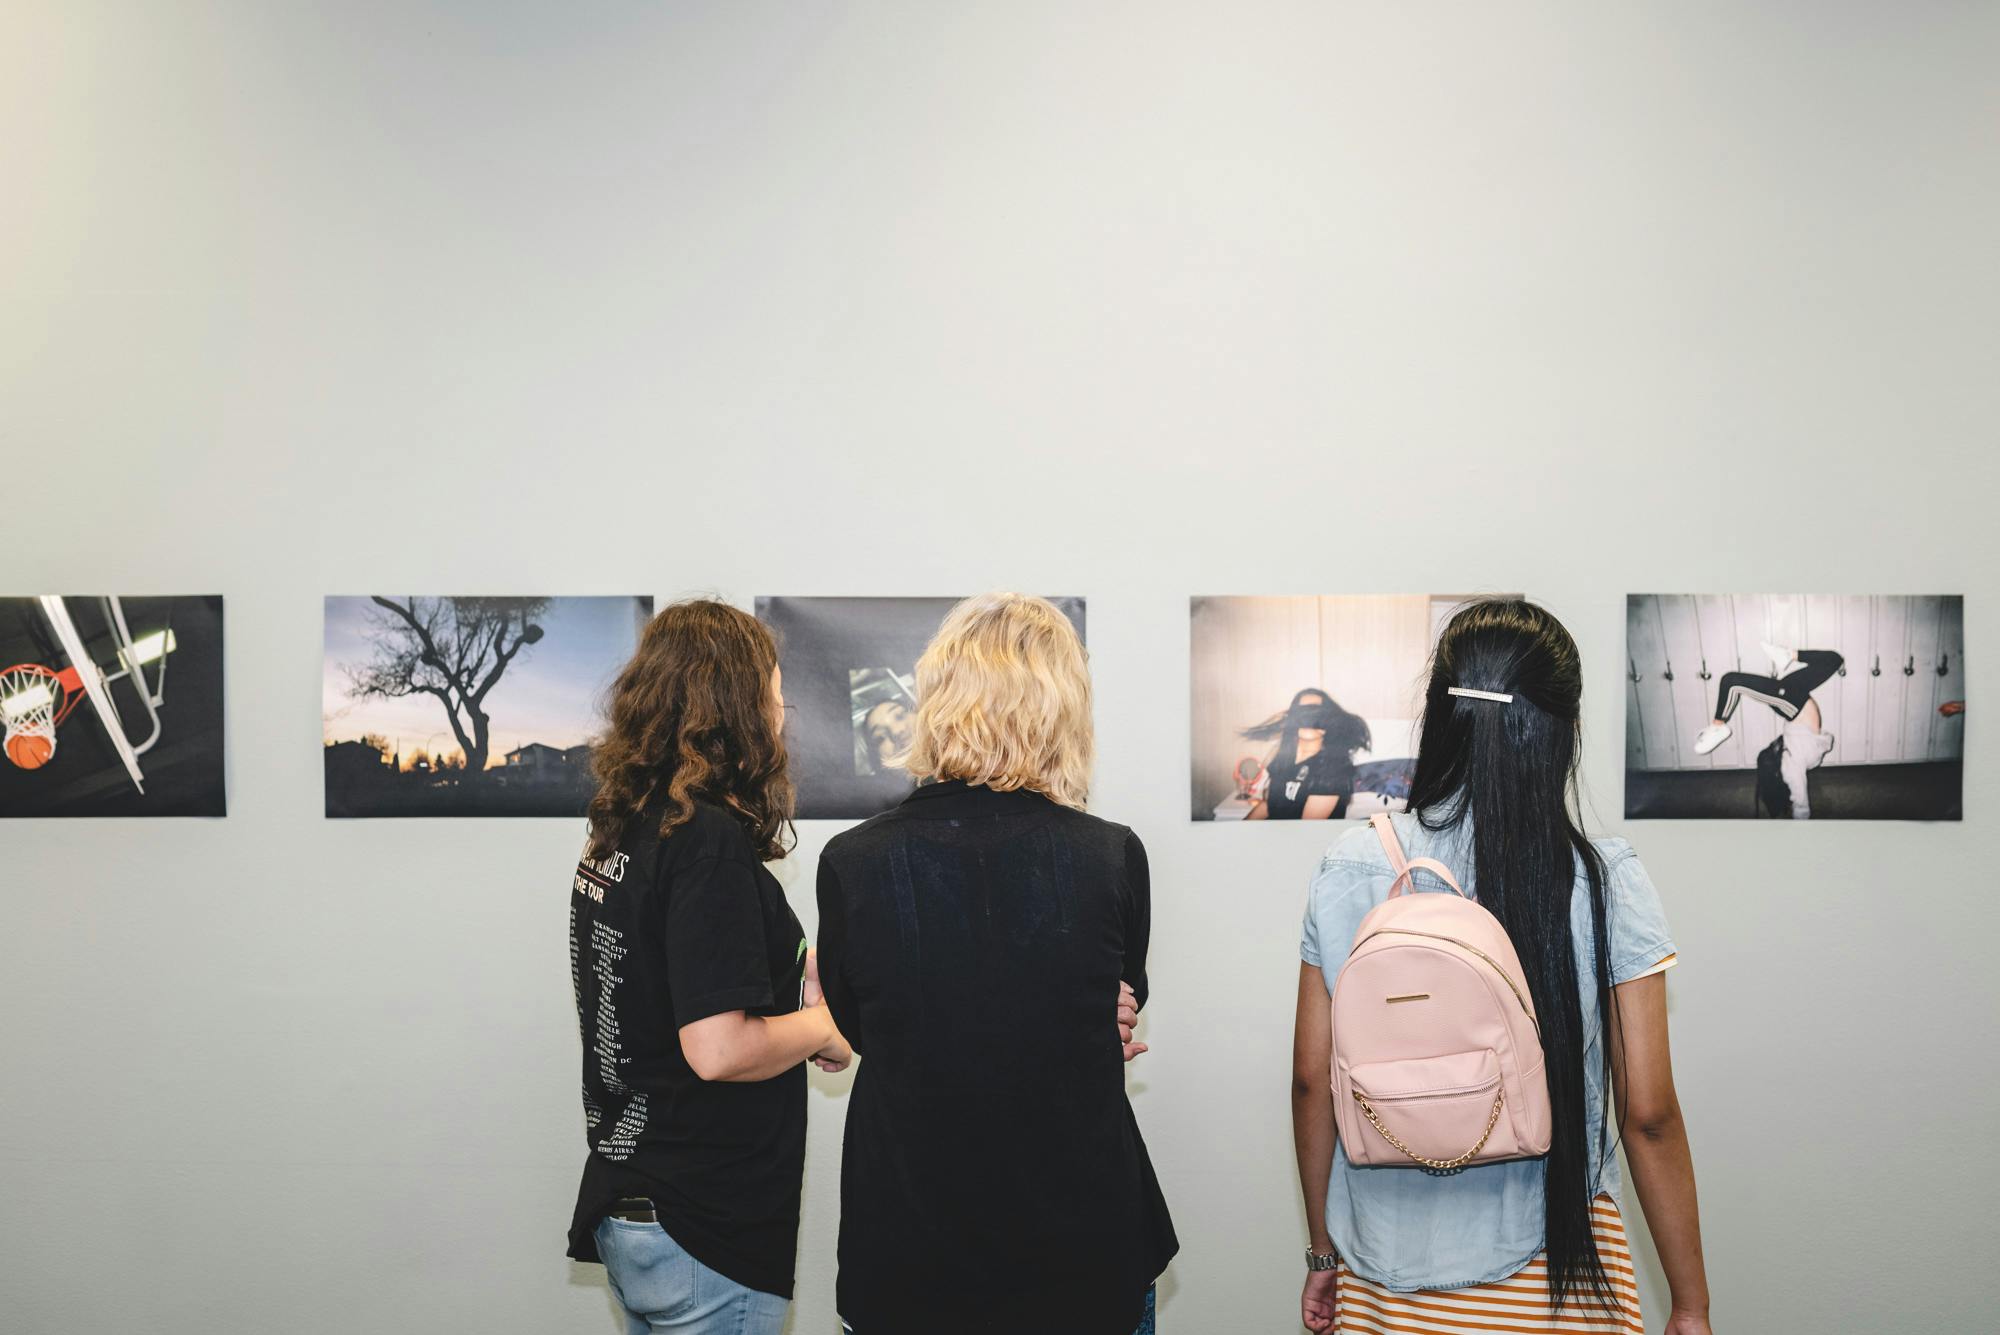 Three people, with their backs to the camera, look at a row of unframed photographs hanging on a grey gallery wall.